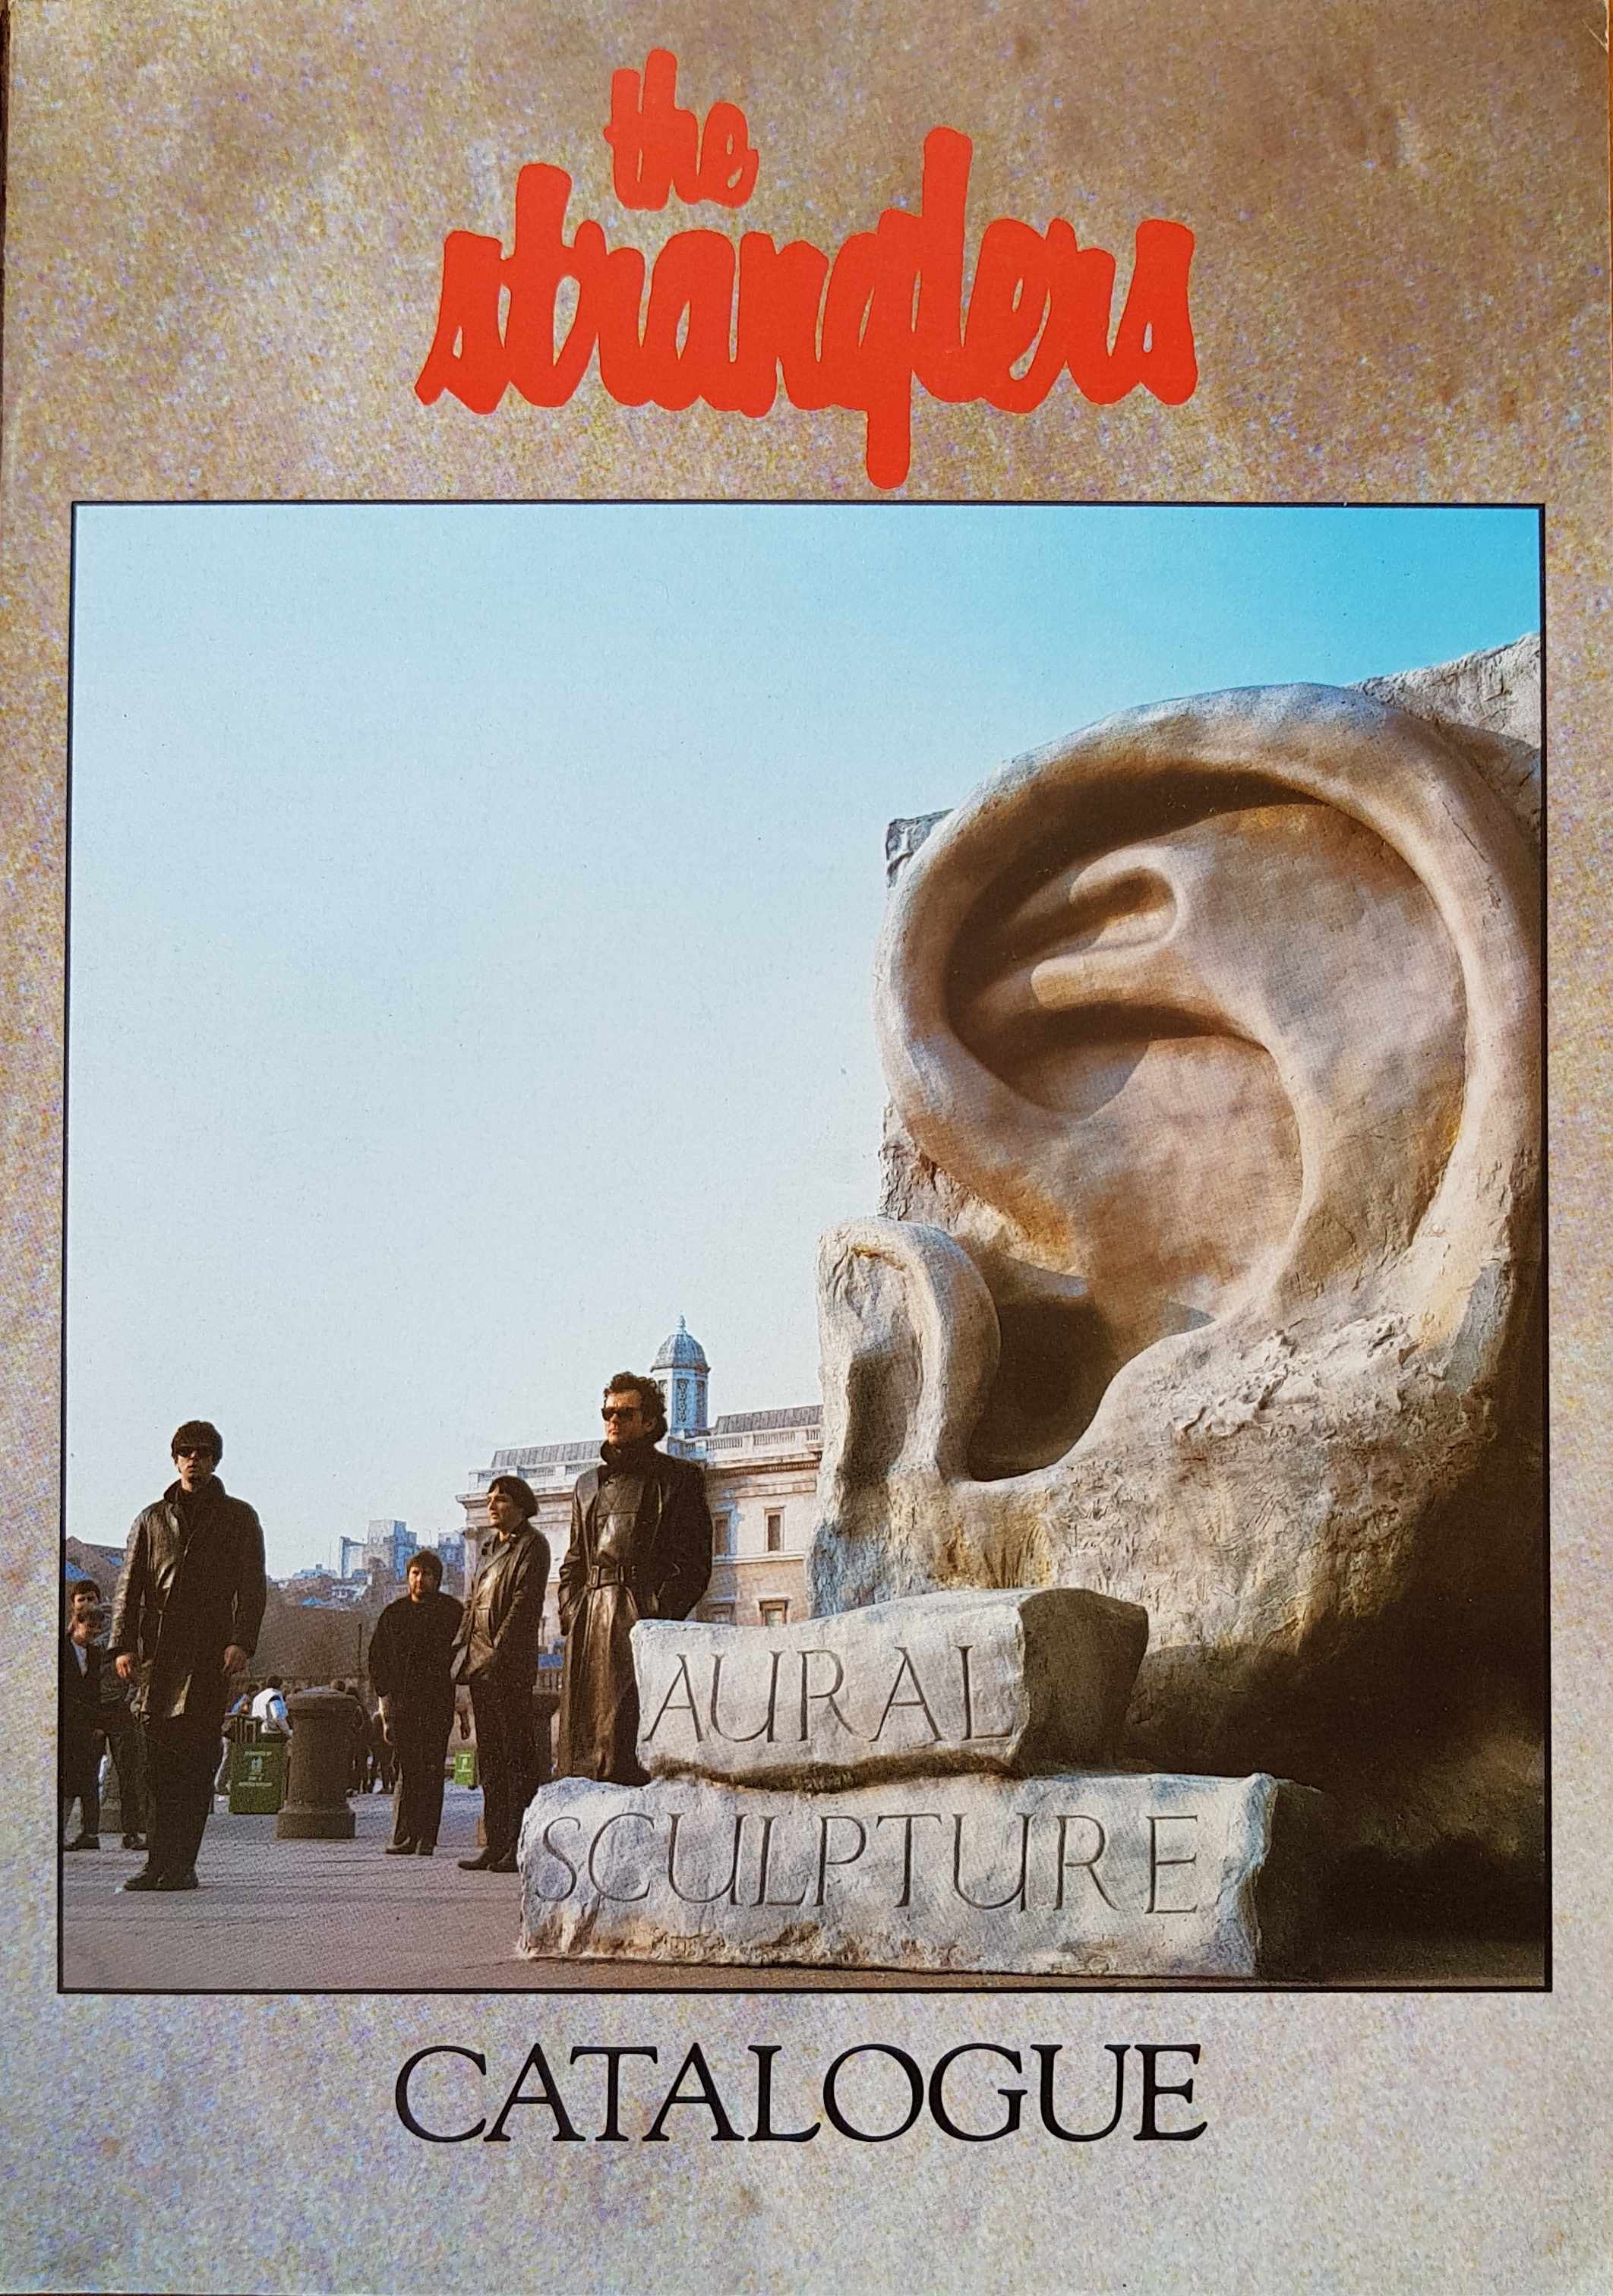 Picture of Aural sculpture catalogue by artist The Stranglers  from The Stranglers books